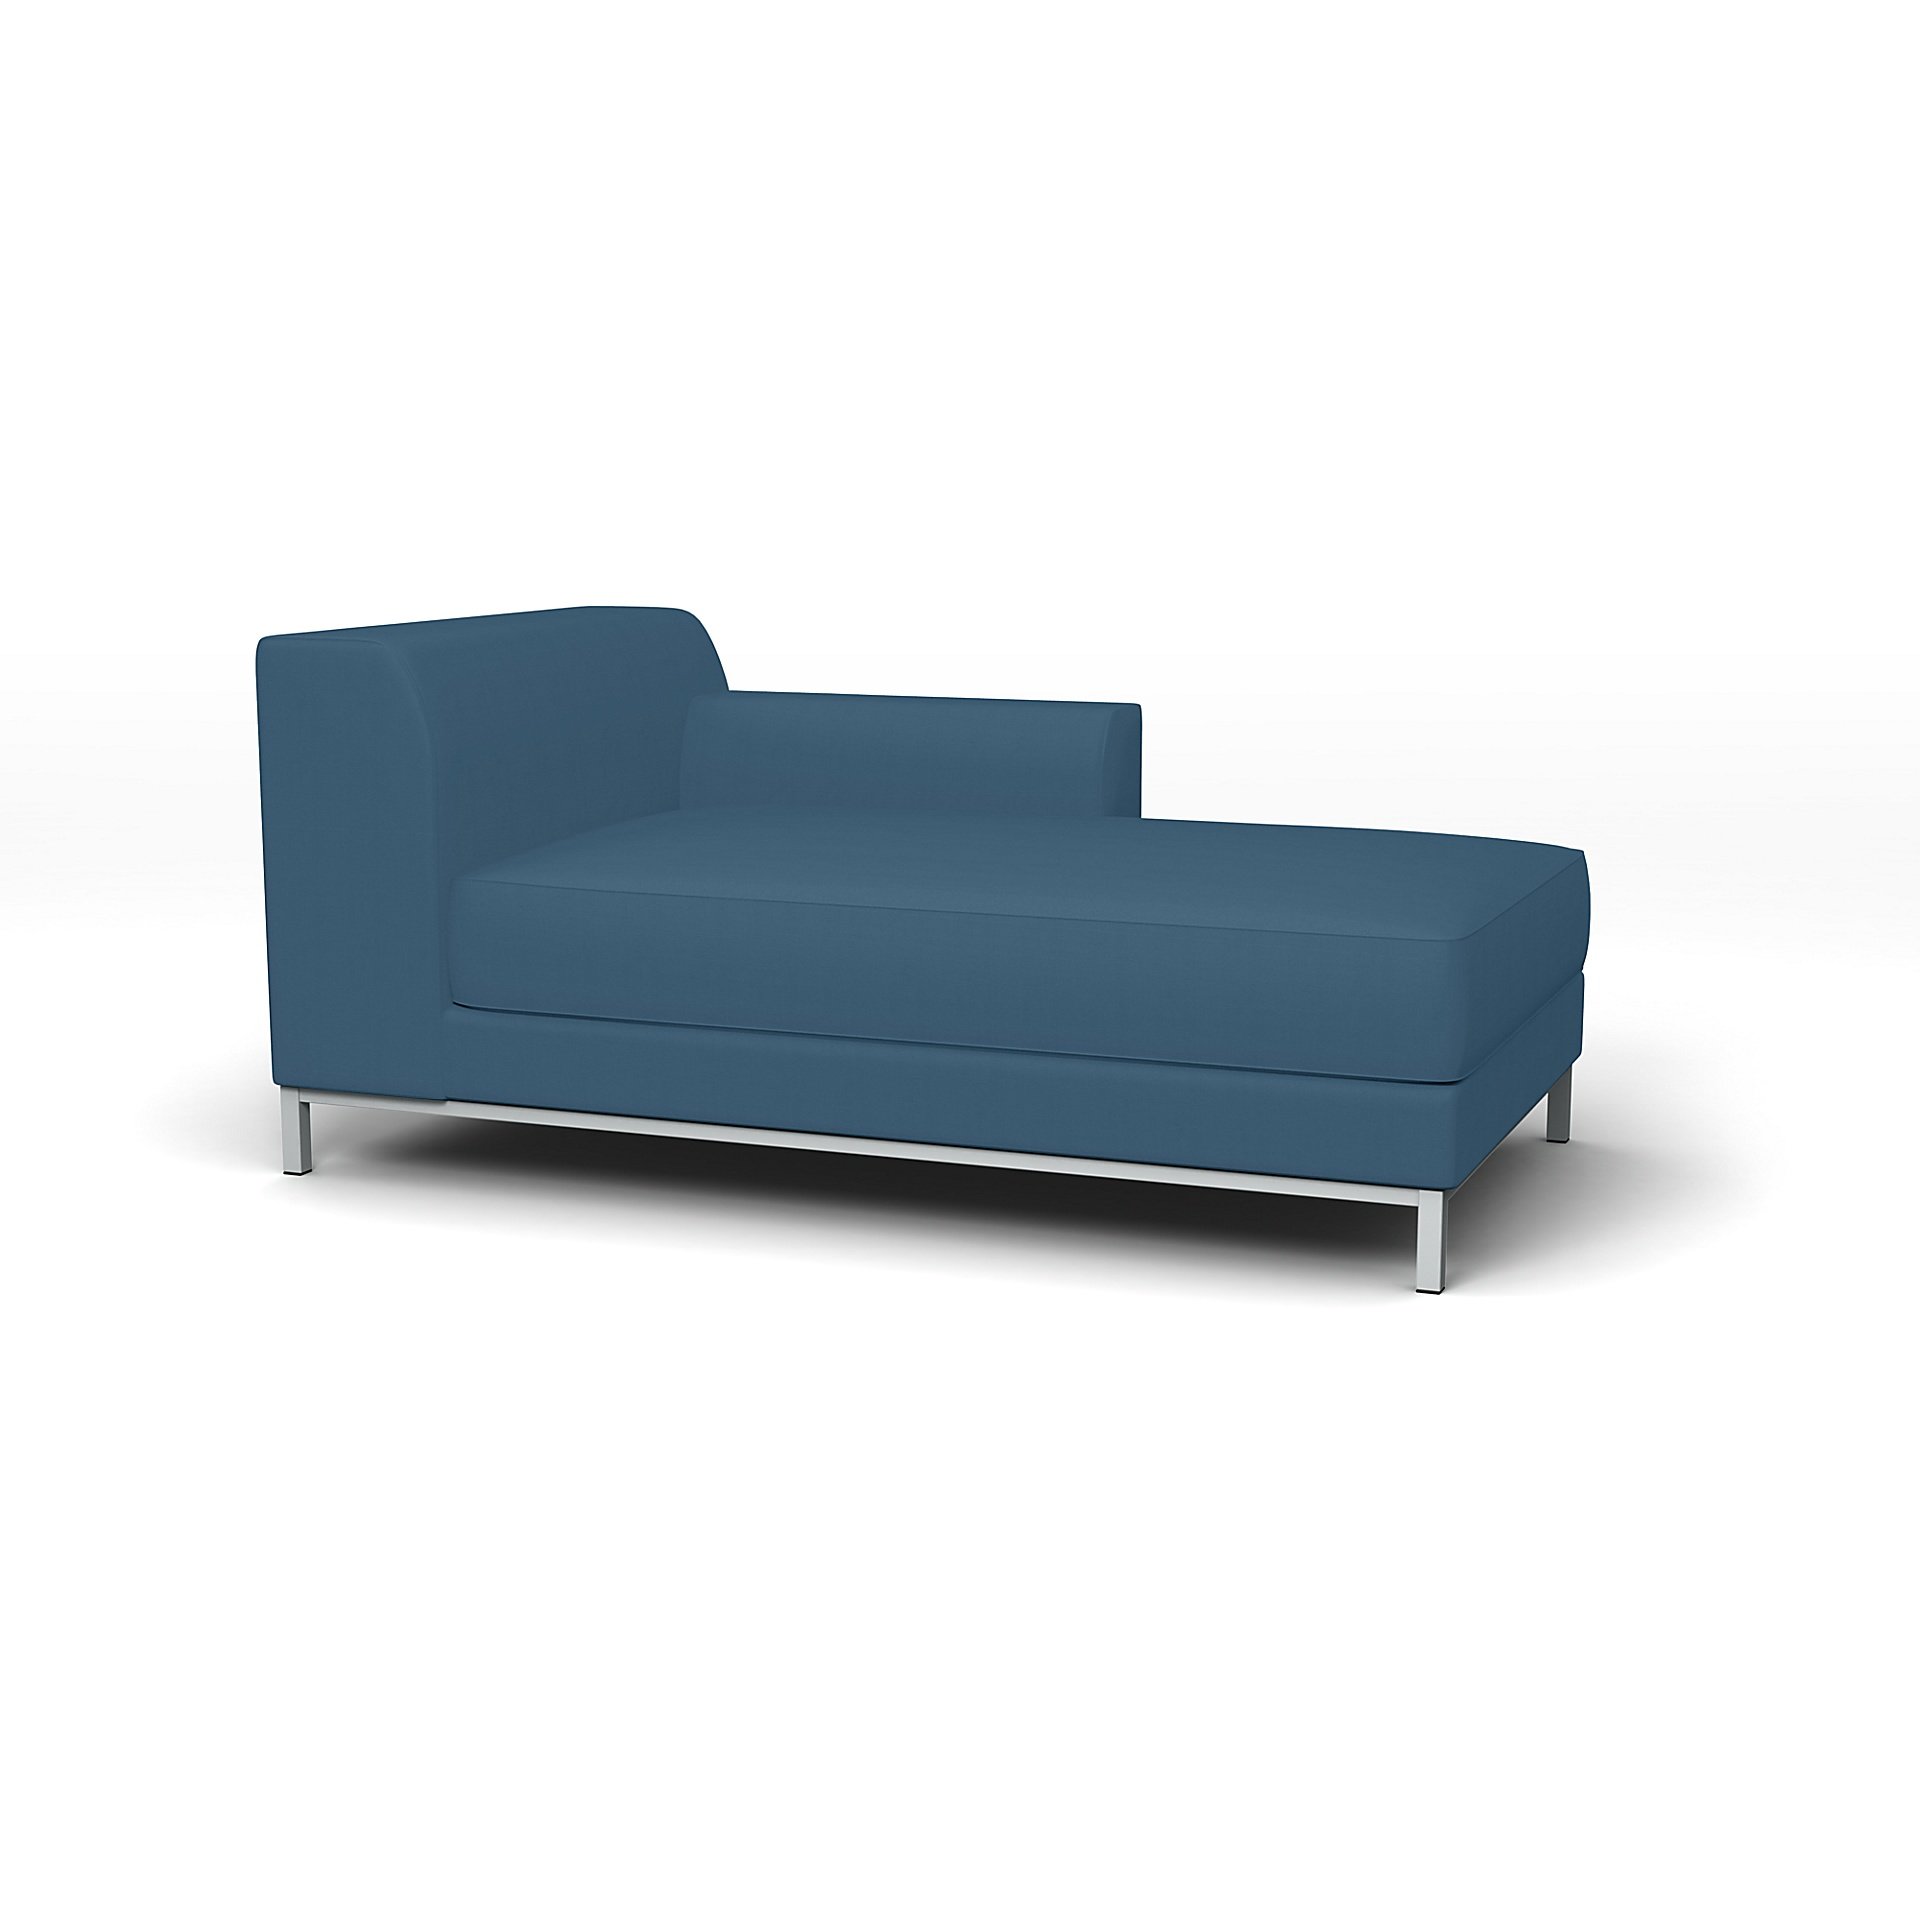 IKEA - Kramfors Chaise Longue with Right Arm Cover, Real Teal, Cotton - Bemz